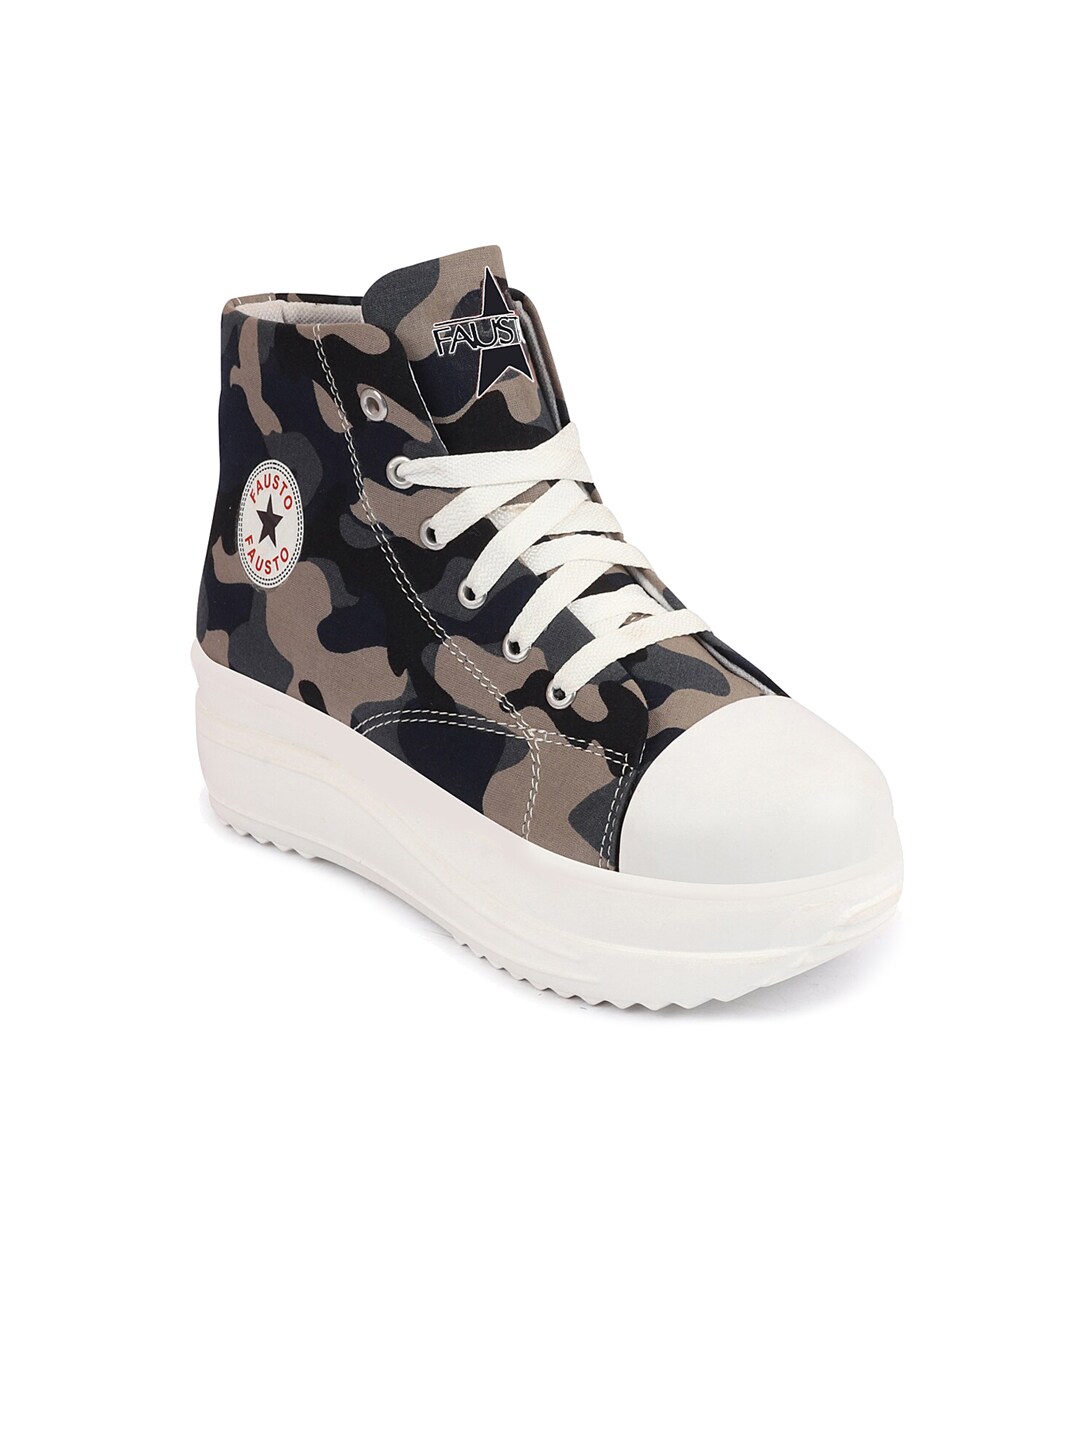 FAUSTO Women Printed Lightweight Mid Top Canvas Sneakers Price in India